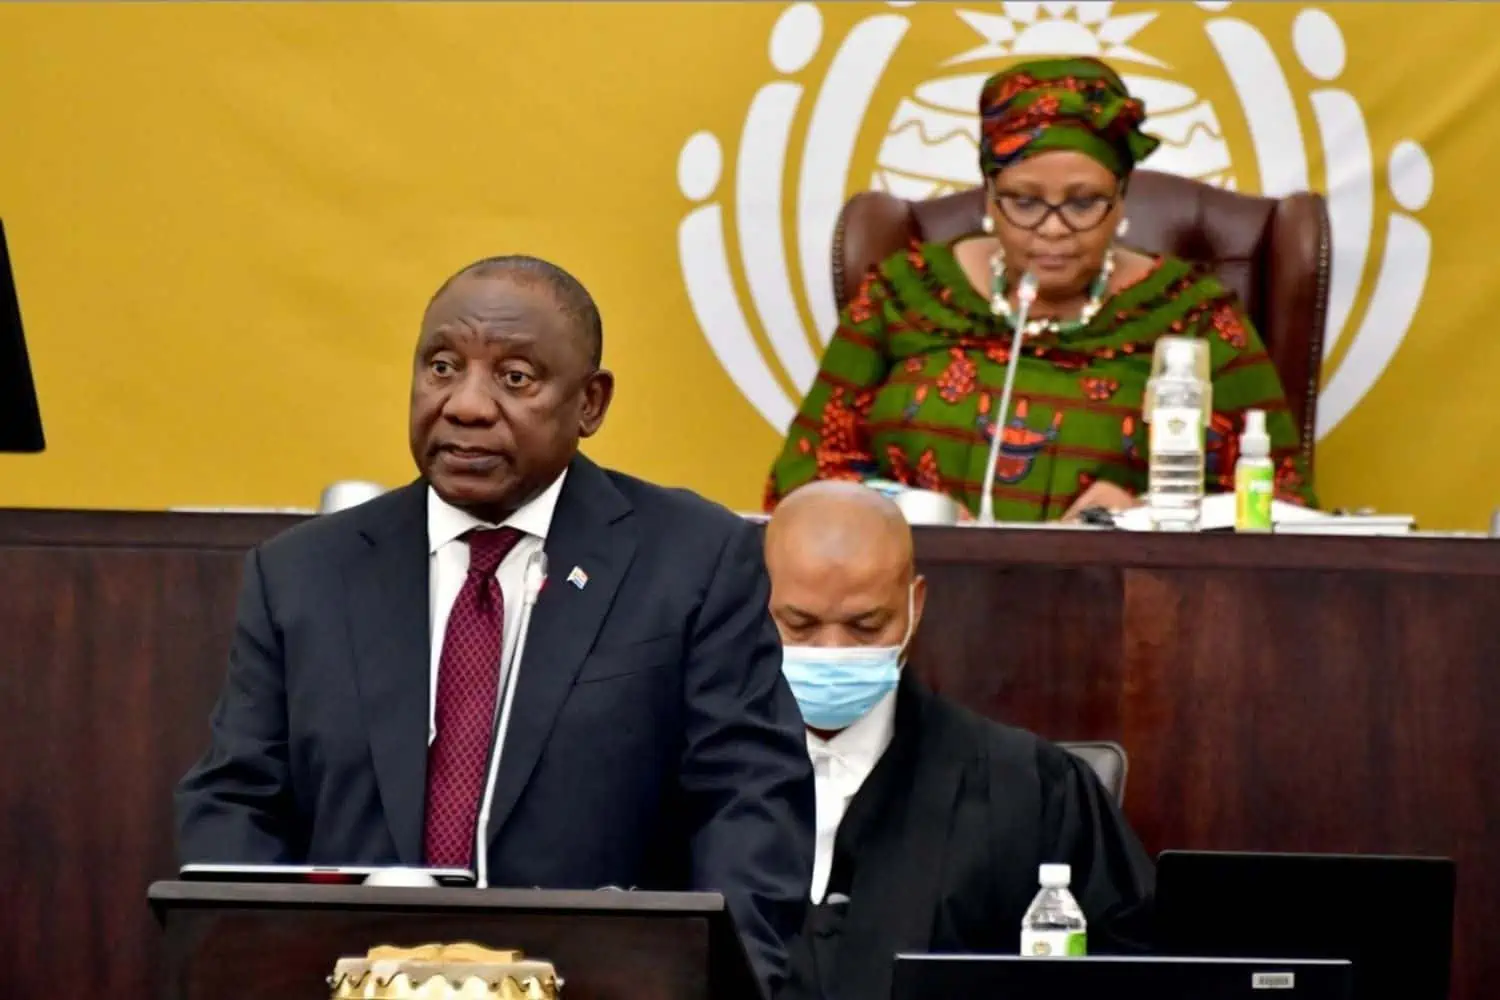 Today's Top News for 21 March 2022 - Ramaphosa to address the nation soon